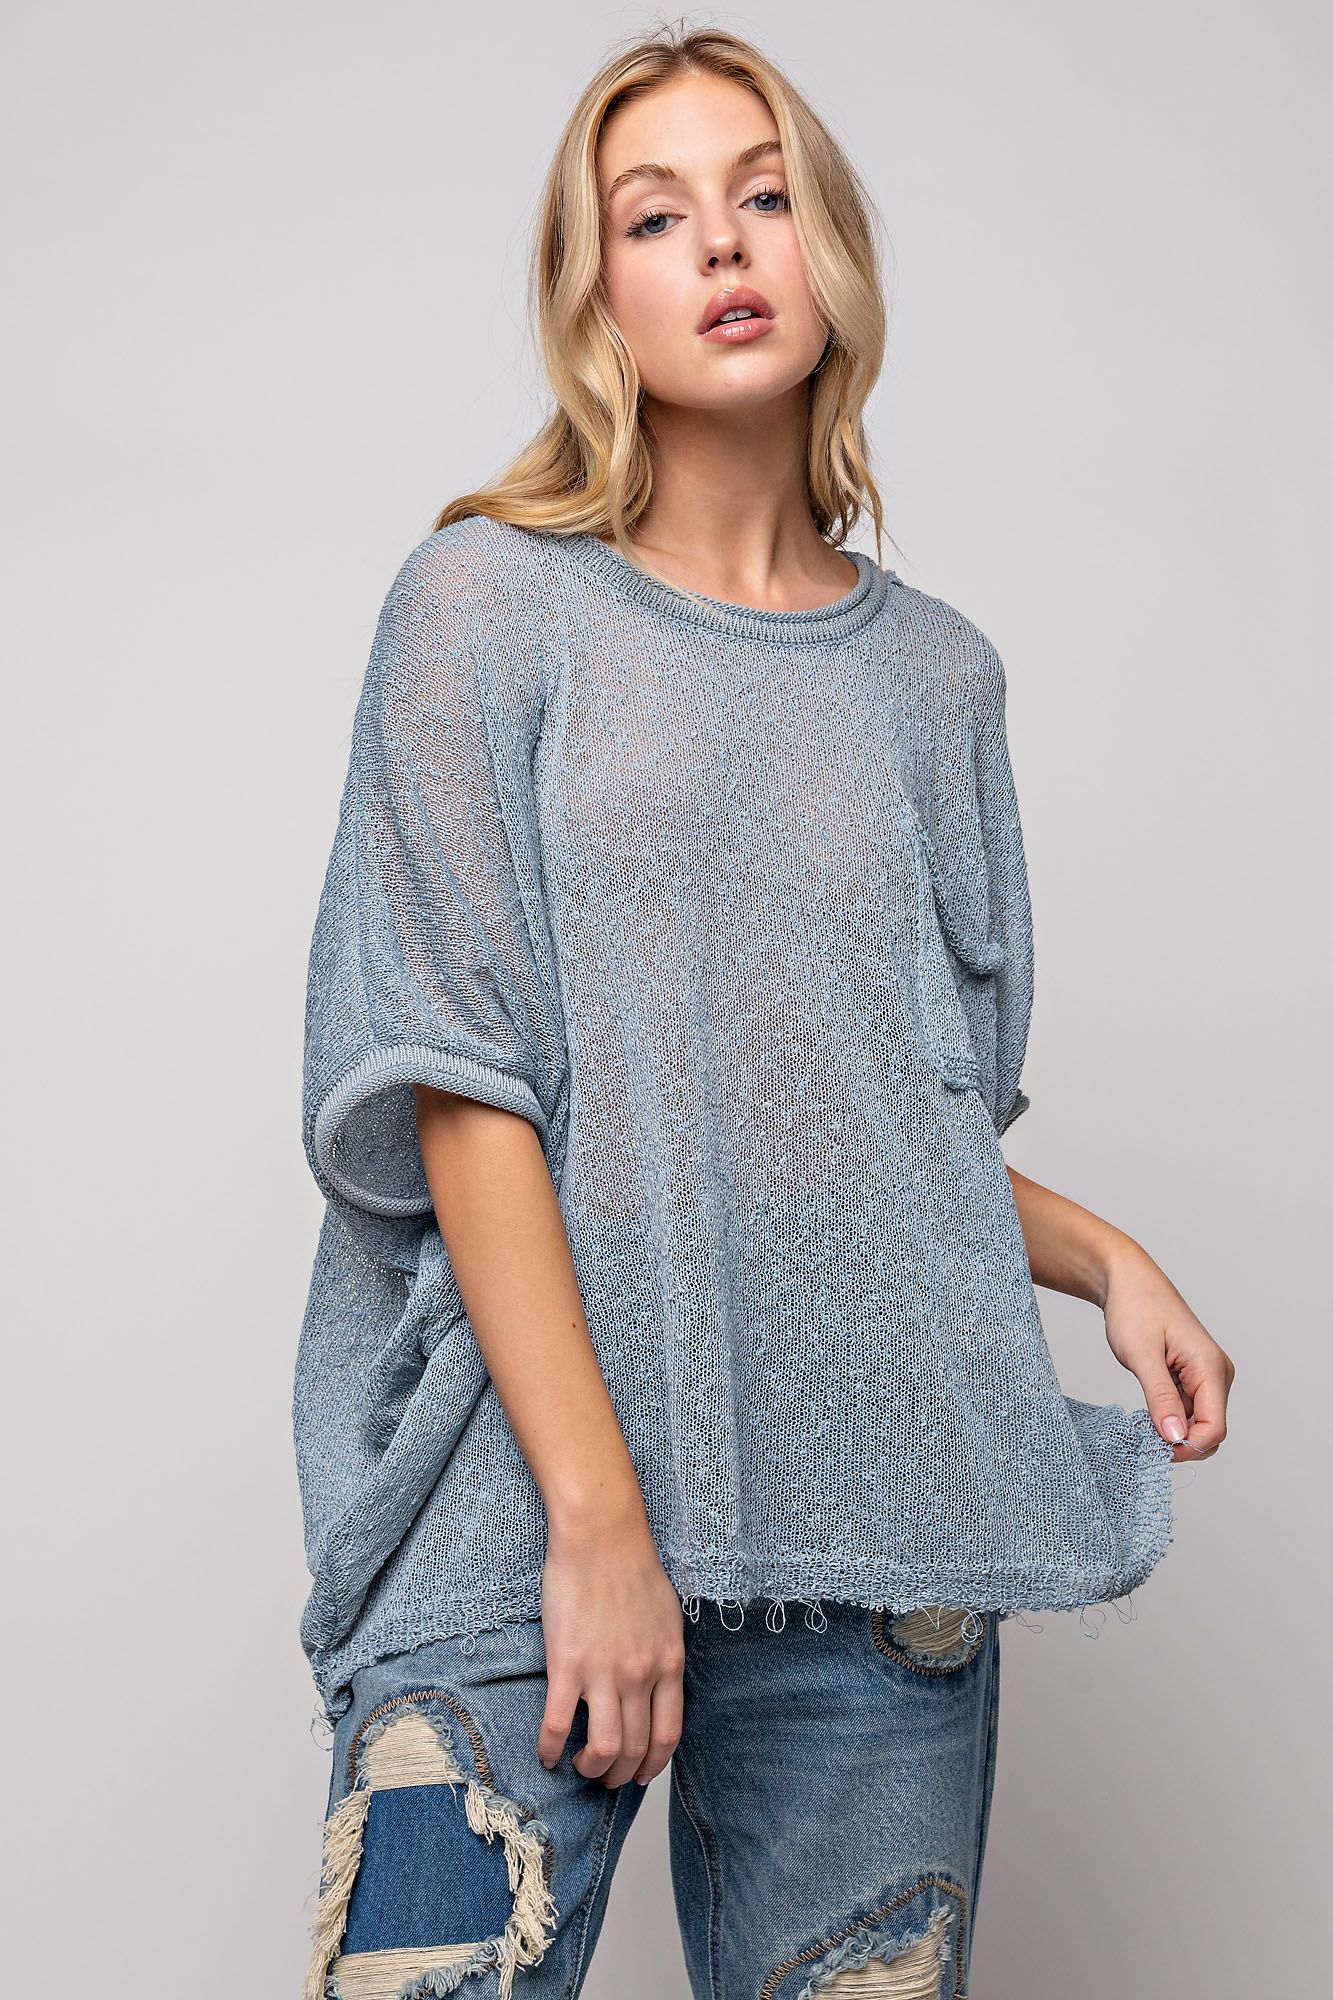 Easel Plus Lightweight Dolman Sleeves Chest Pockets Thin Sweater Tops